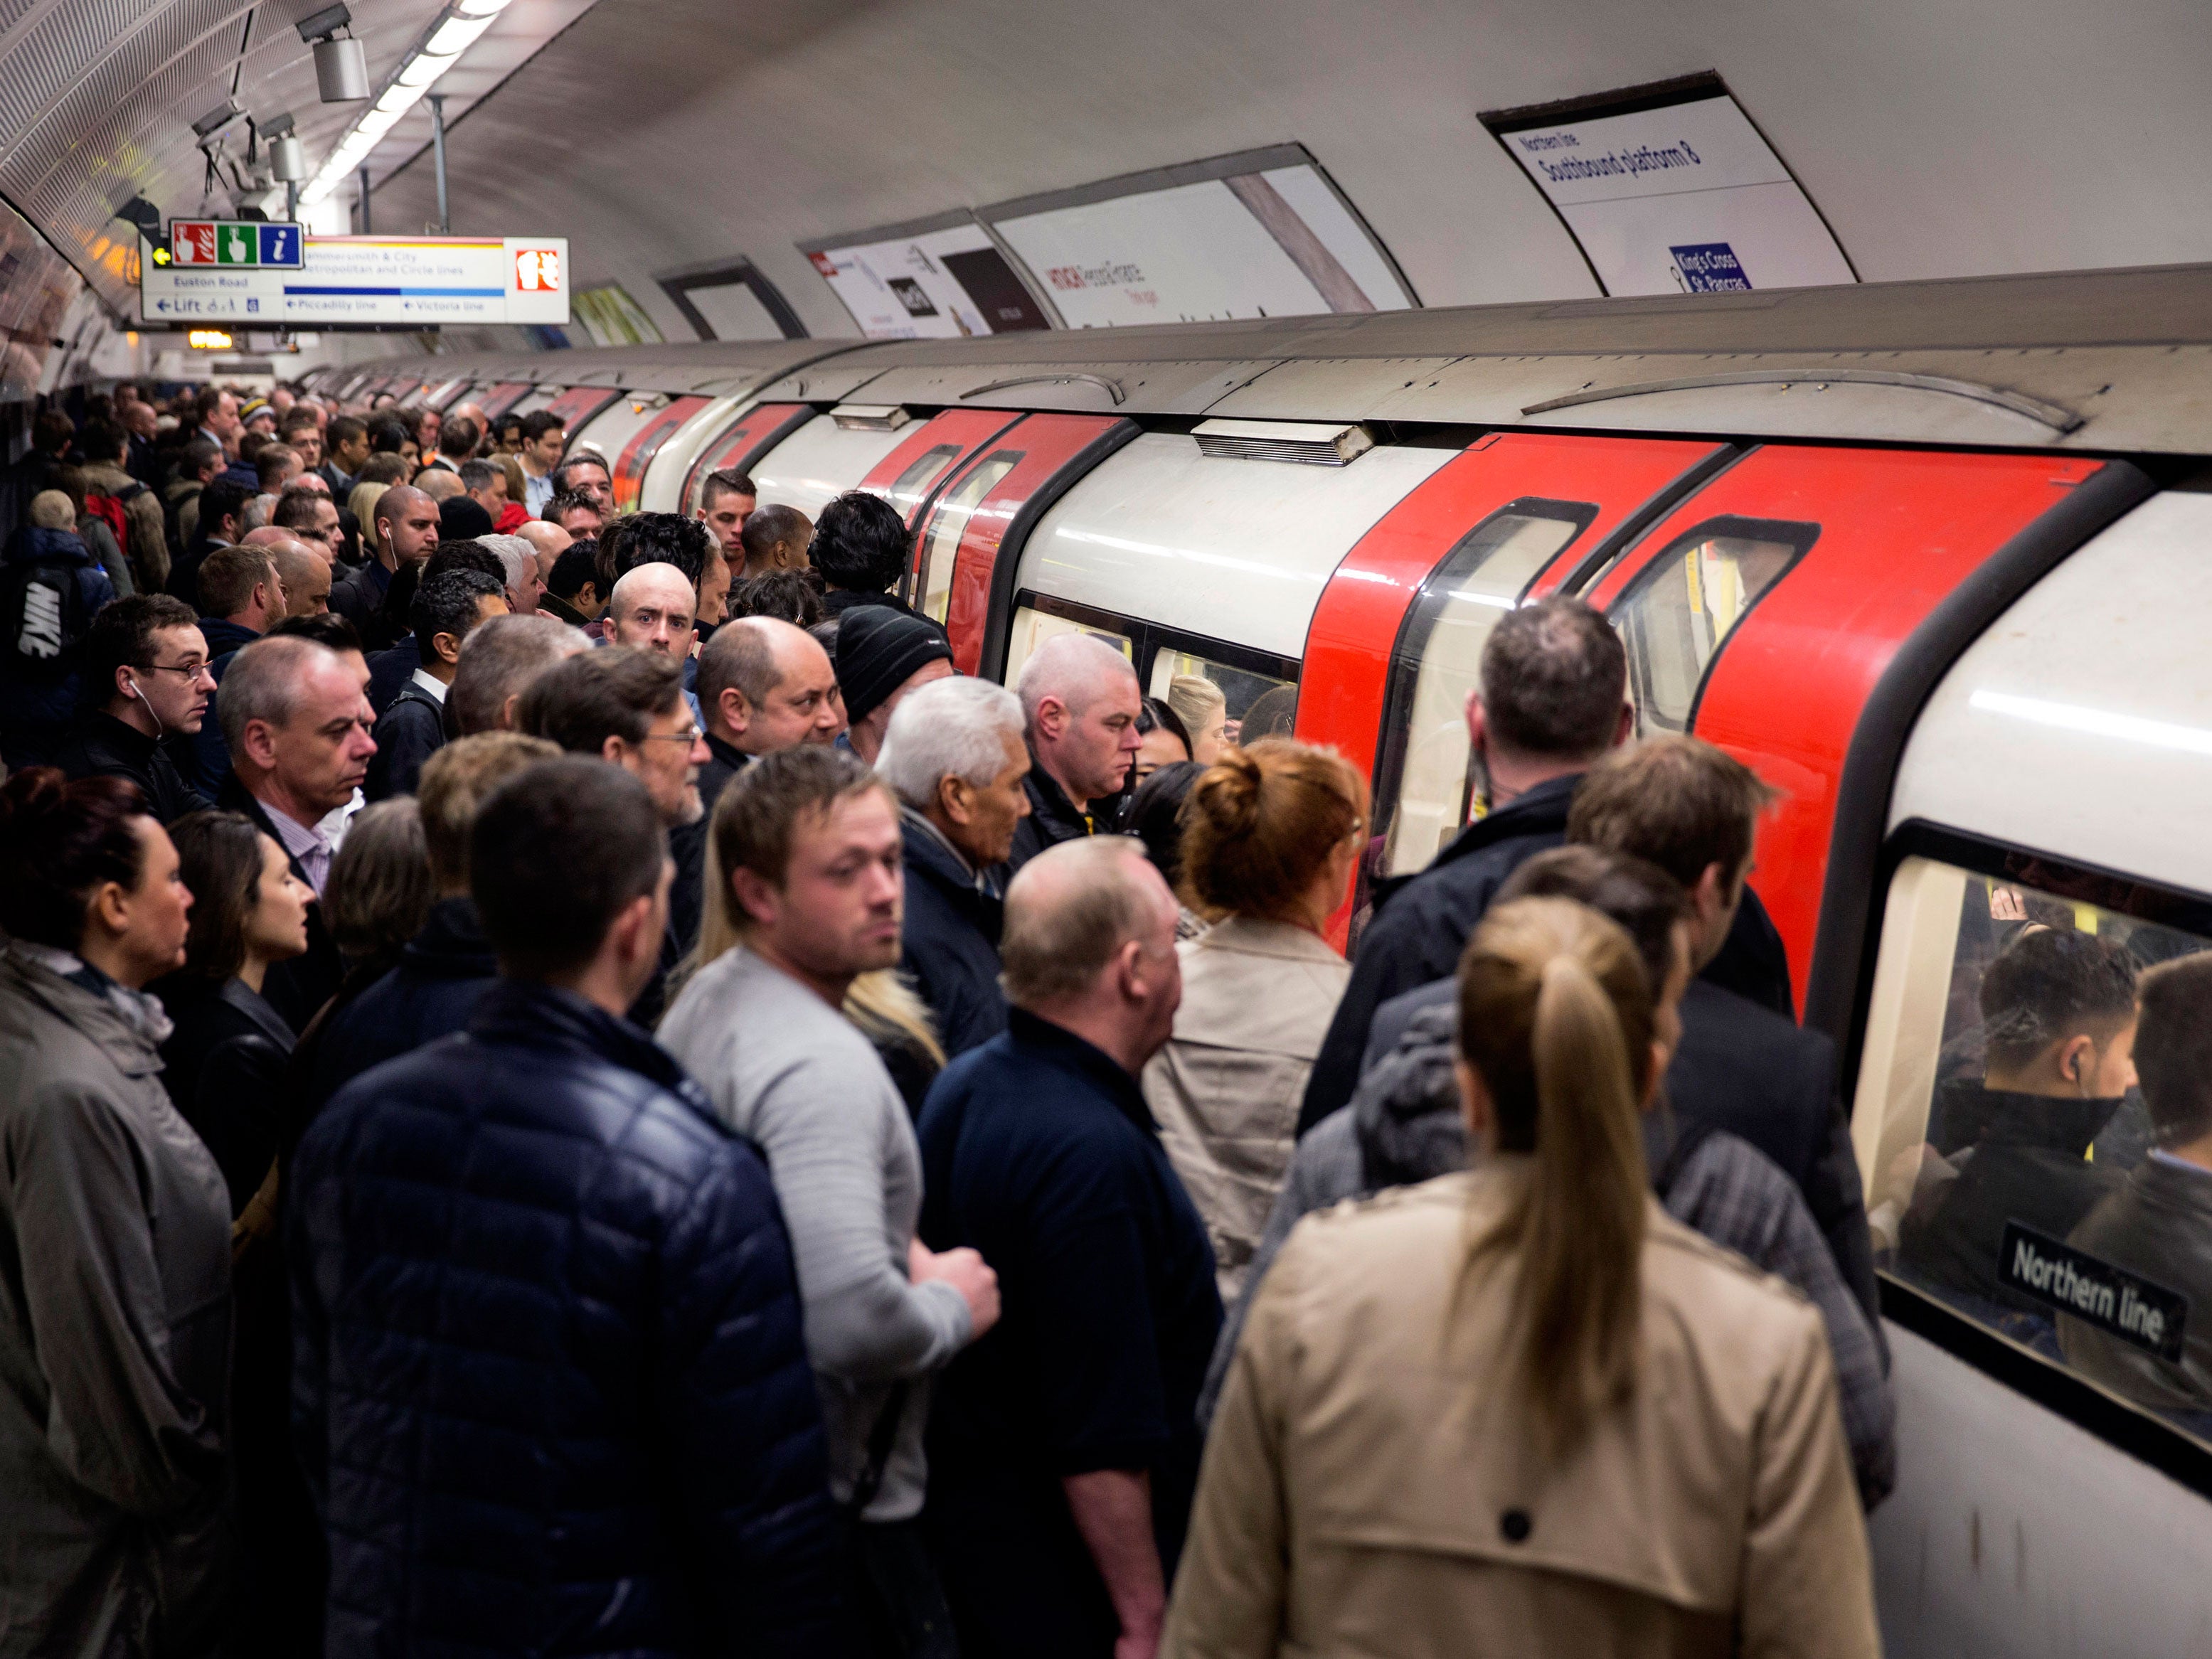 Commuters miss out on huge discounts because they can't afford the upfront cost of an annual travelcard